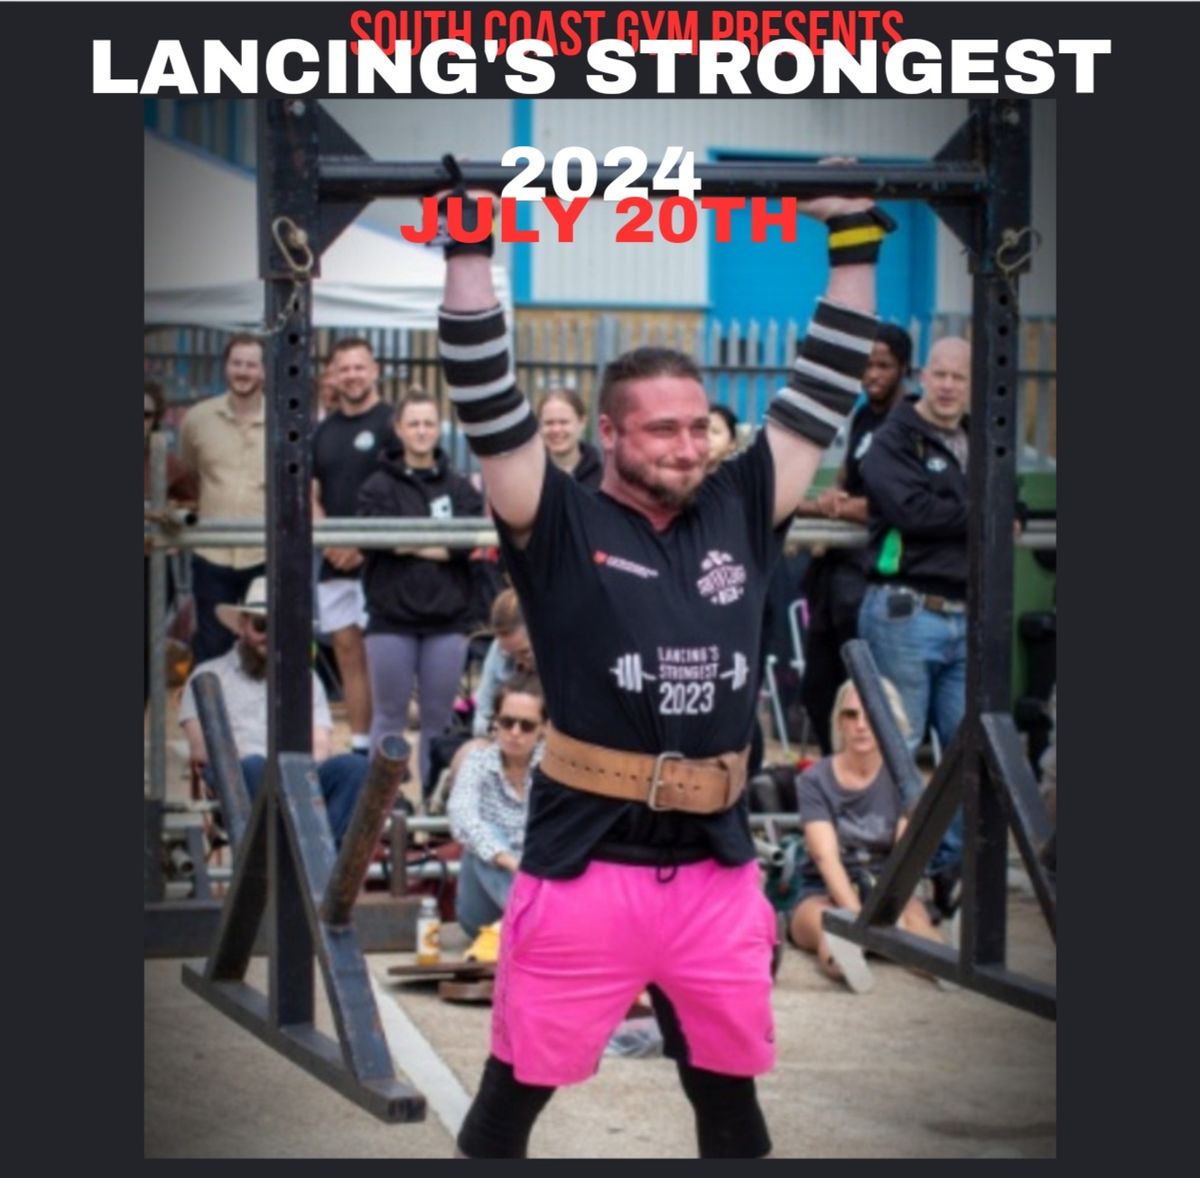 LANCING'S STRONGEST 2024